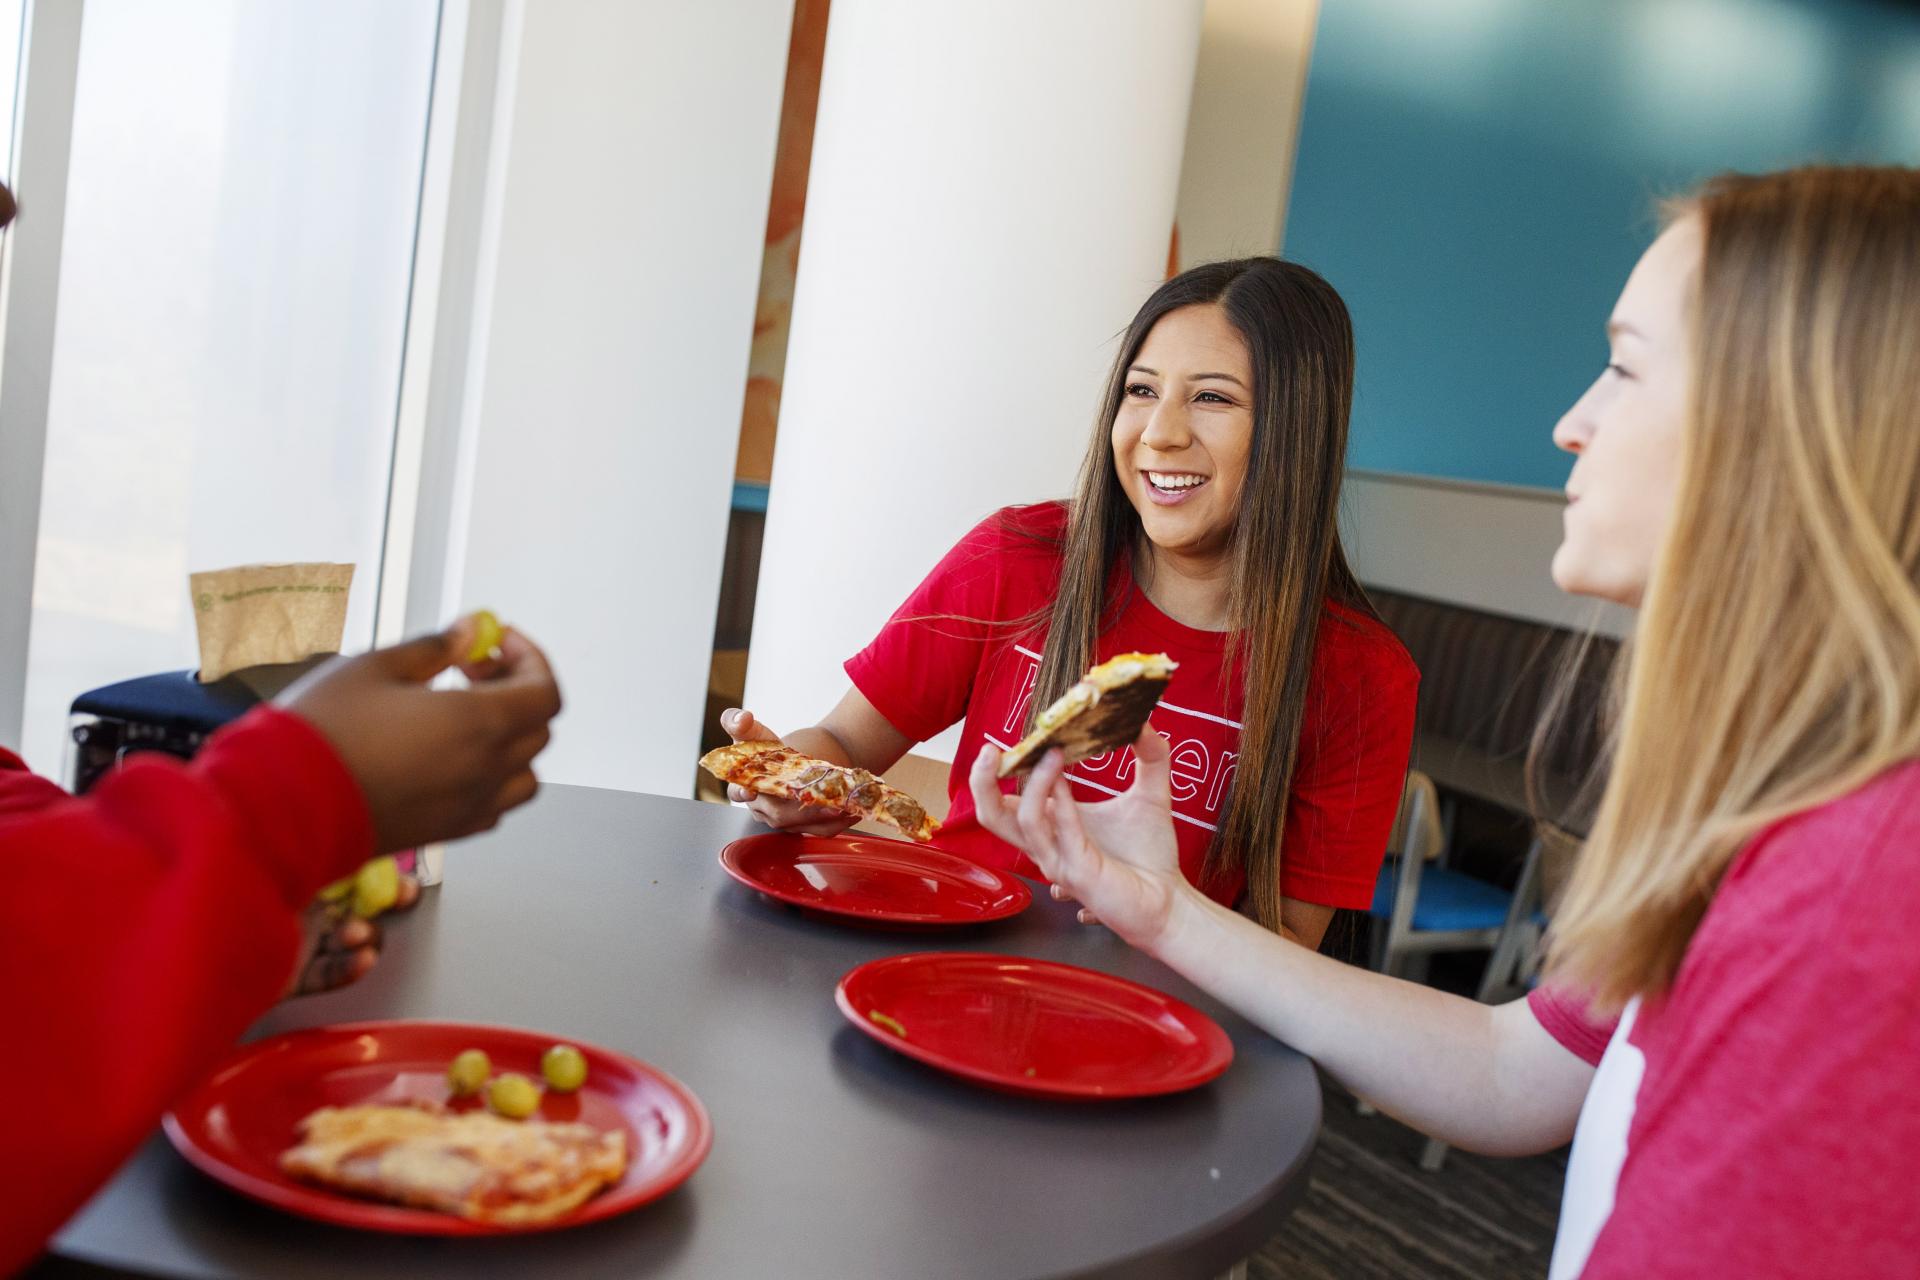 Students dine in the Cather Dining Center